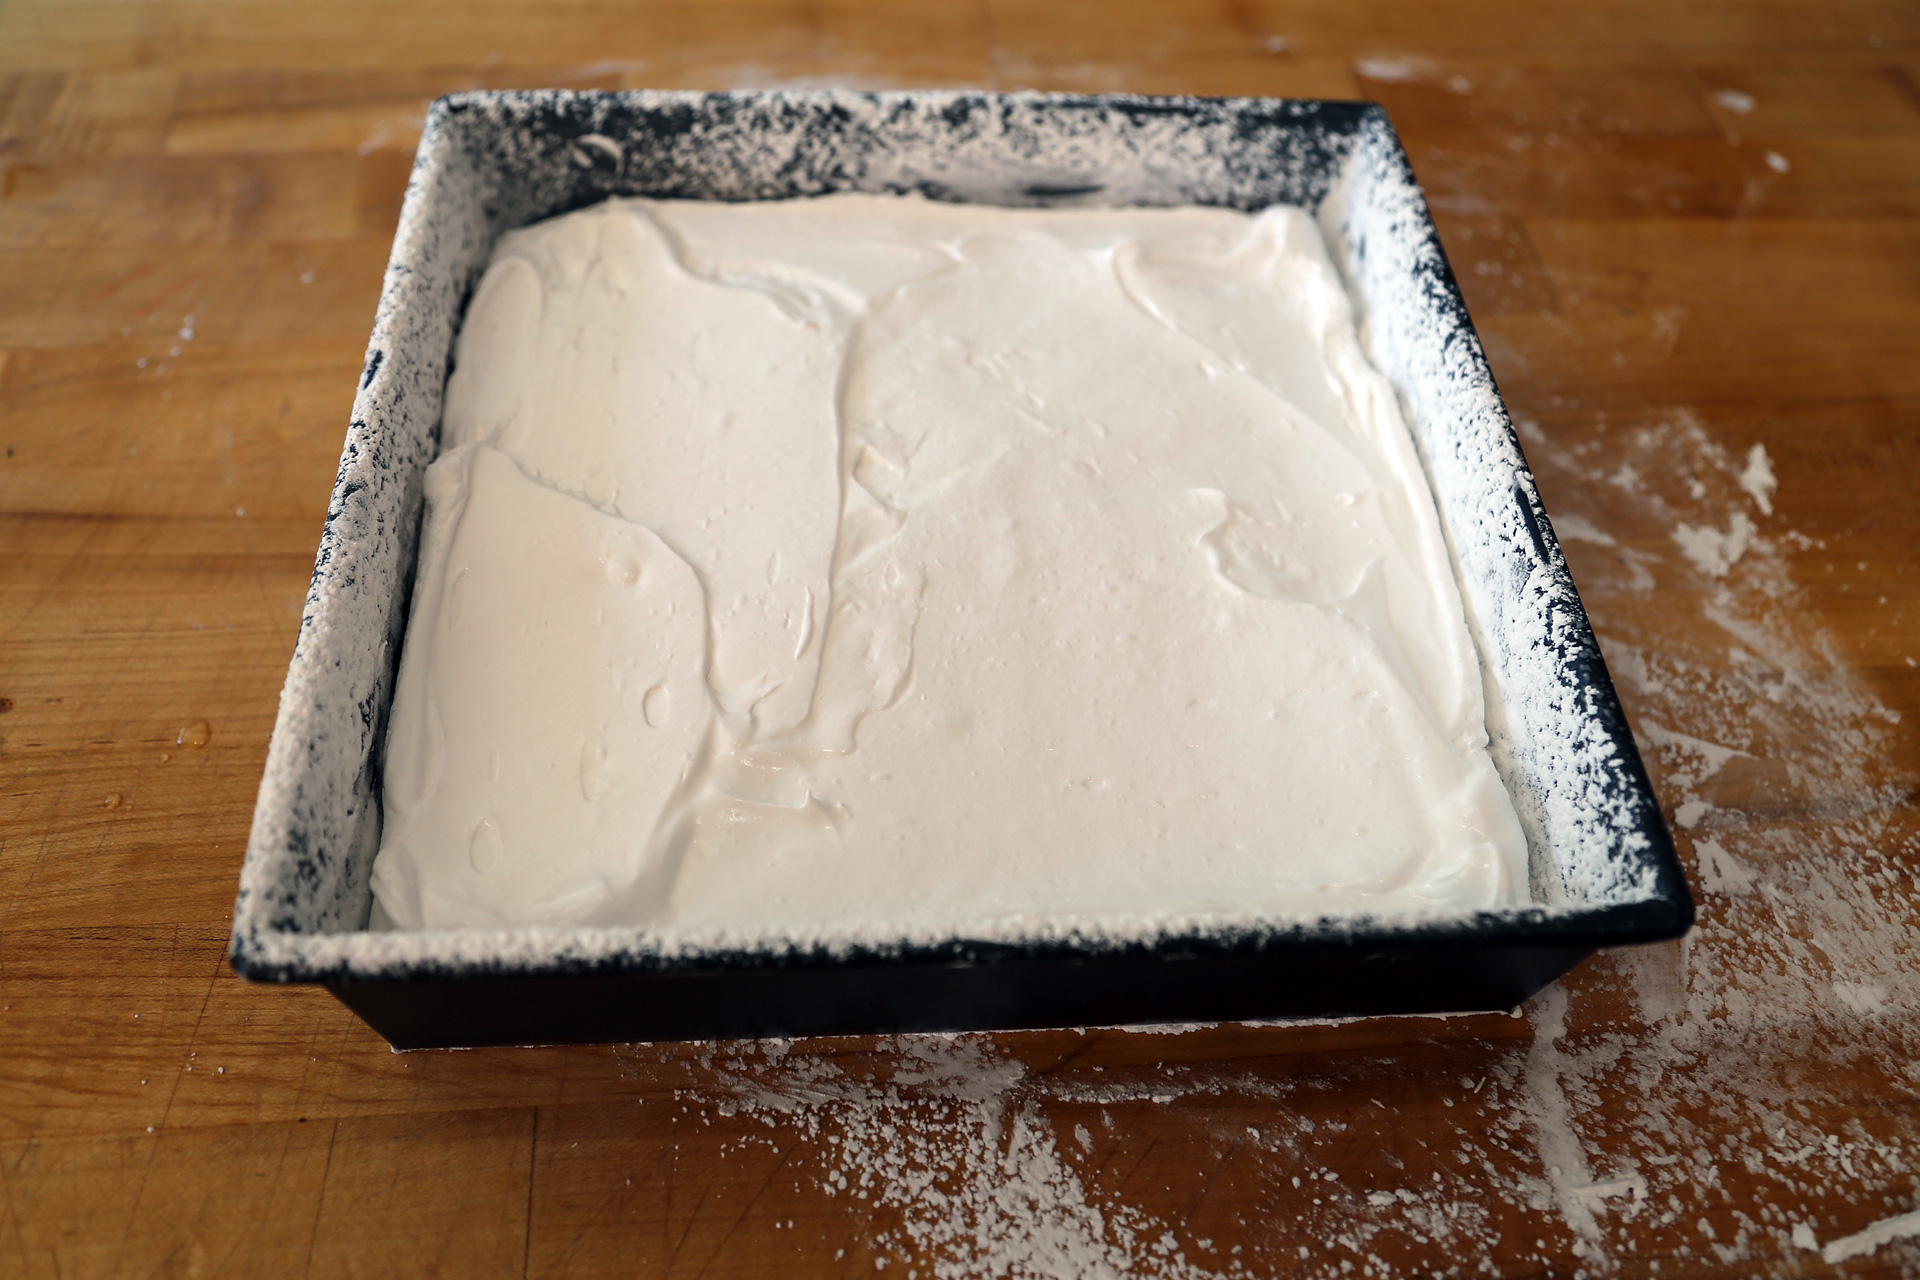 Let stand until a skin forms on the surface, about 1 hour, then dust with some of the reserved powdered sugar mixture. Let sit in a cool place until firm, about 2 hours or overnight.